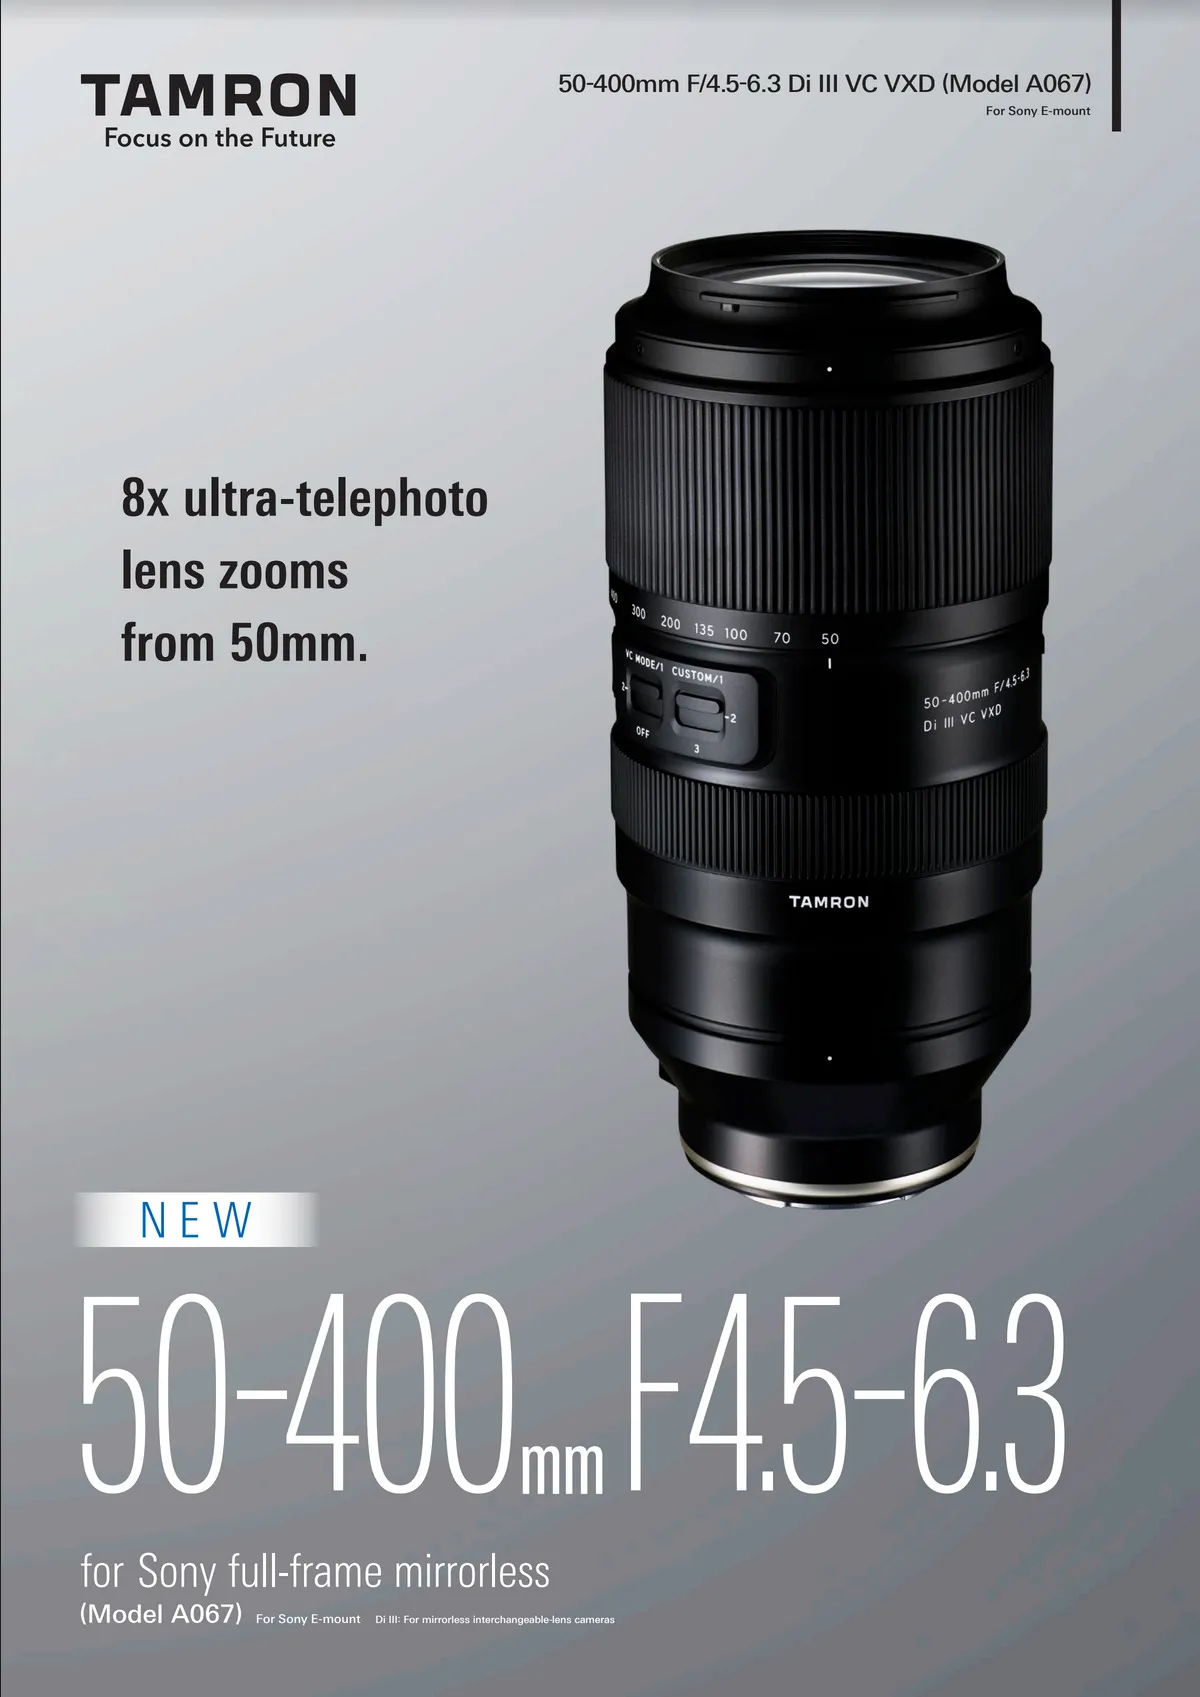 Tamron mm F4..3 Di III VC VXD Lens to be Released on